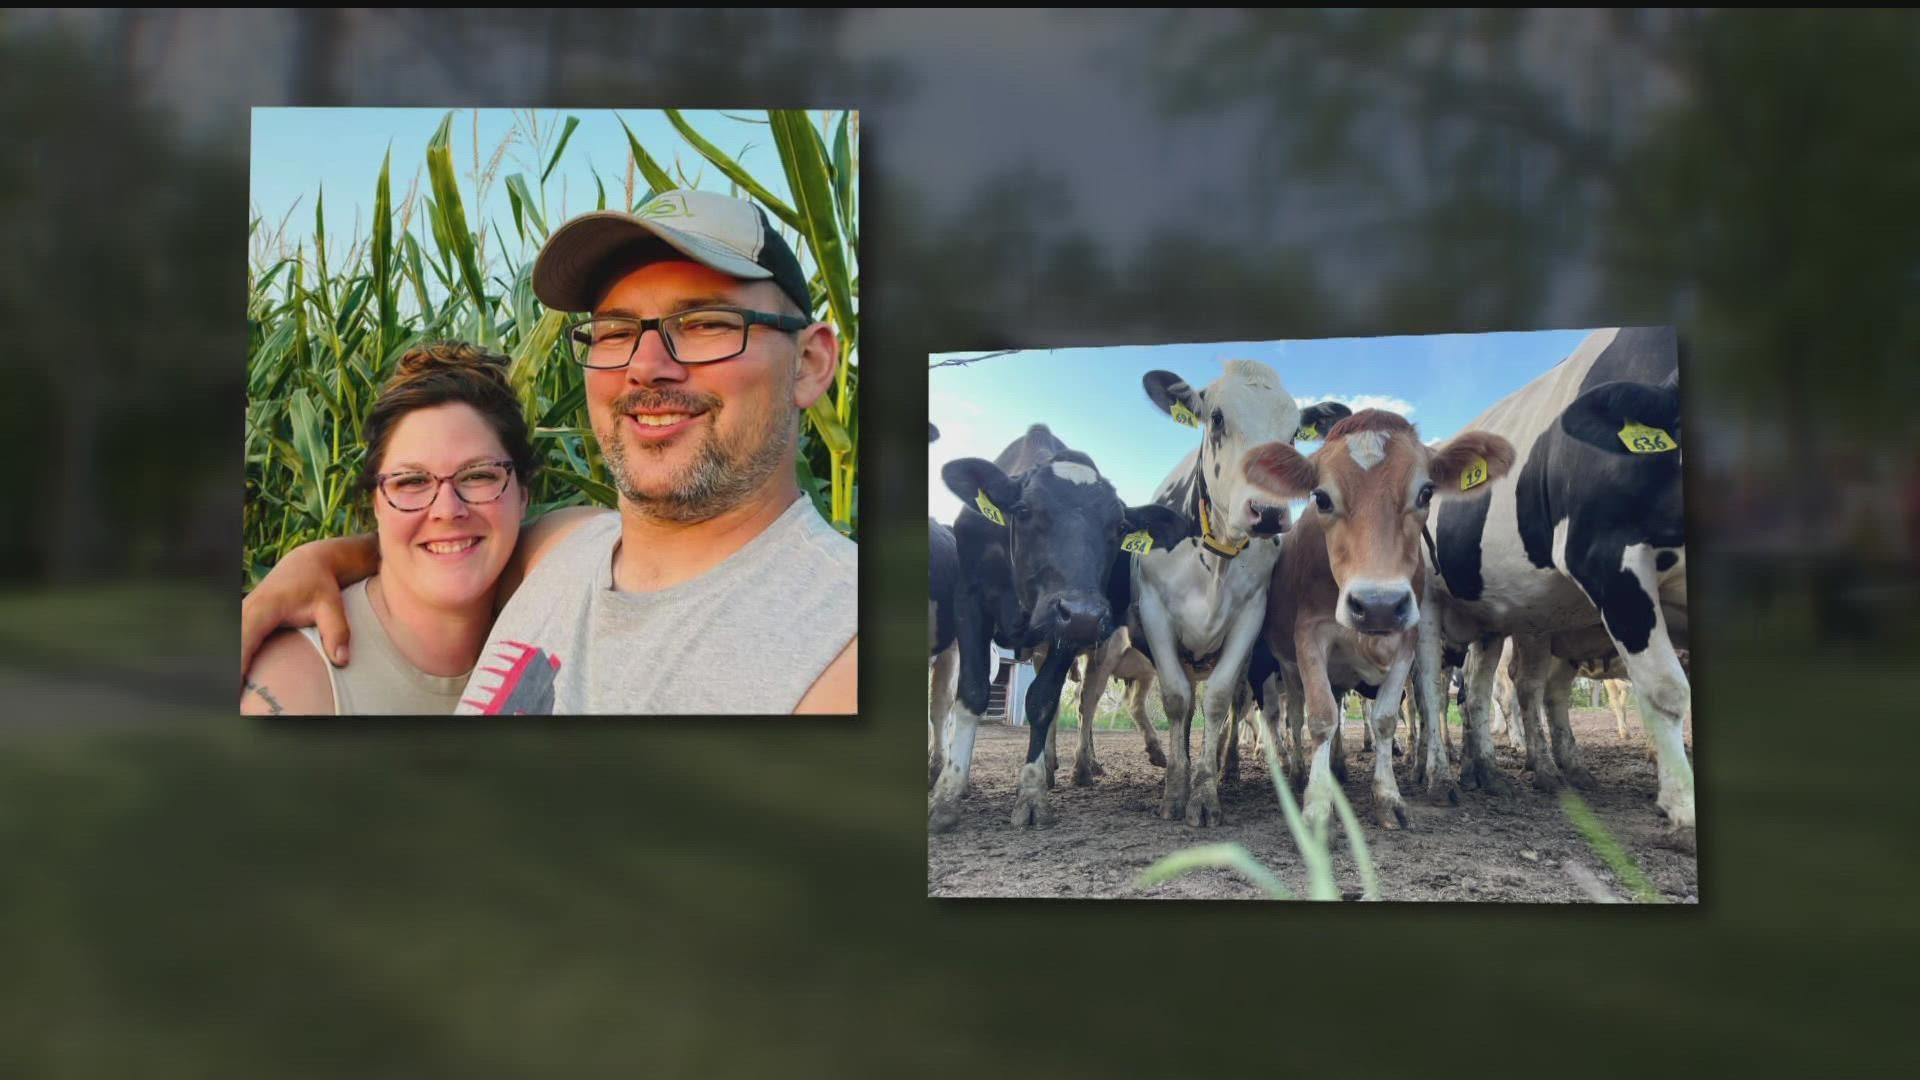 A western Wisconsin community is coming together for a dairy farmer, fighting for his life.